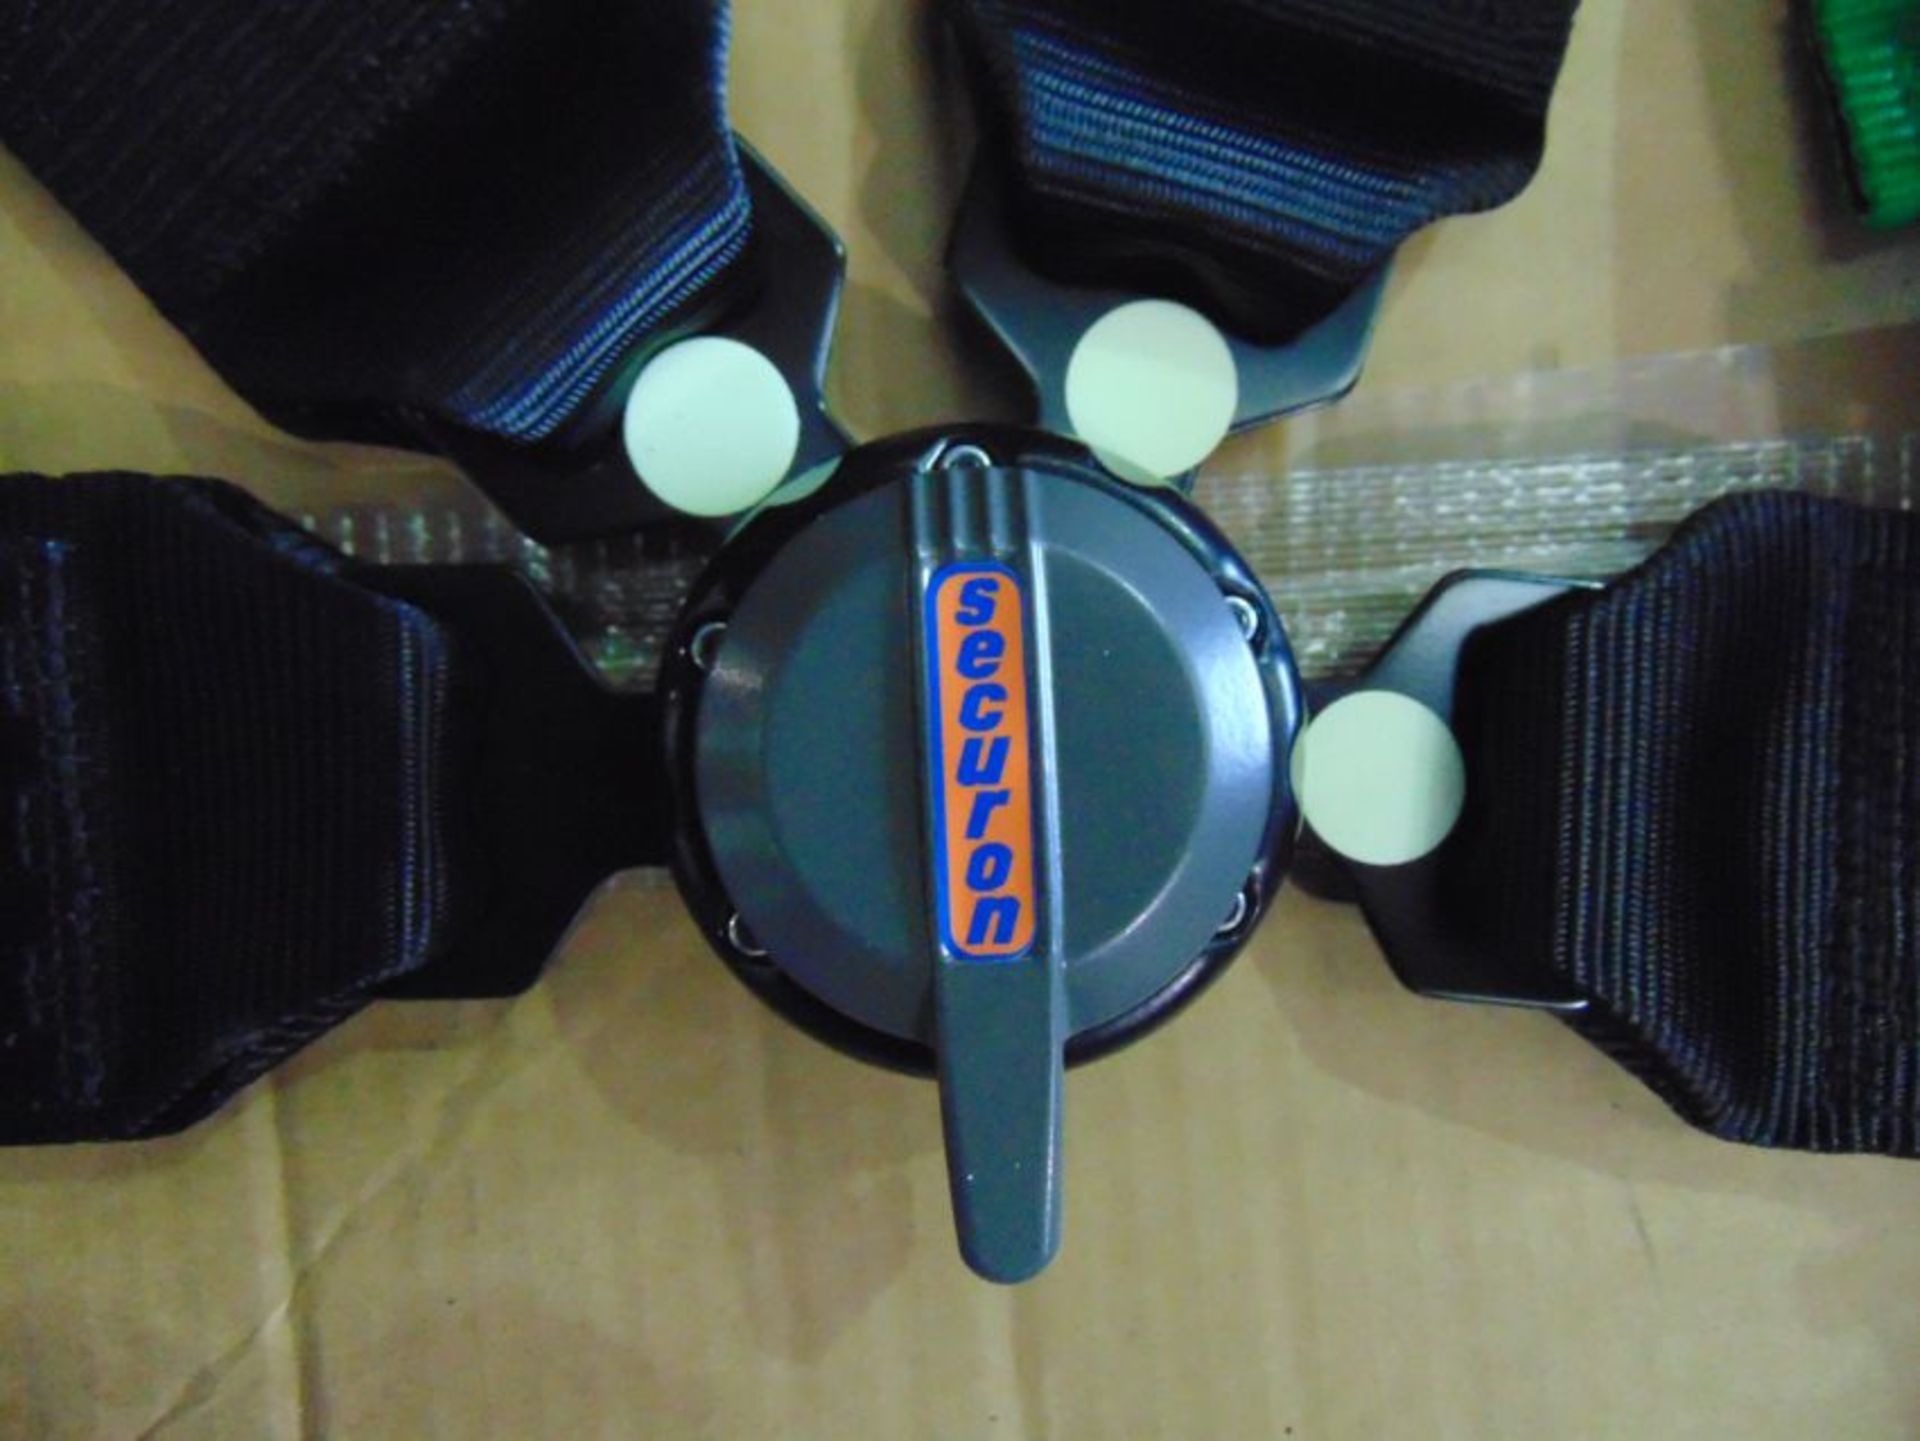 4 x Securon 720BL/V5 4 Point Troop Seat Restraint Harnesses - Image 3 of 5